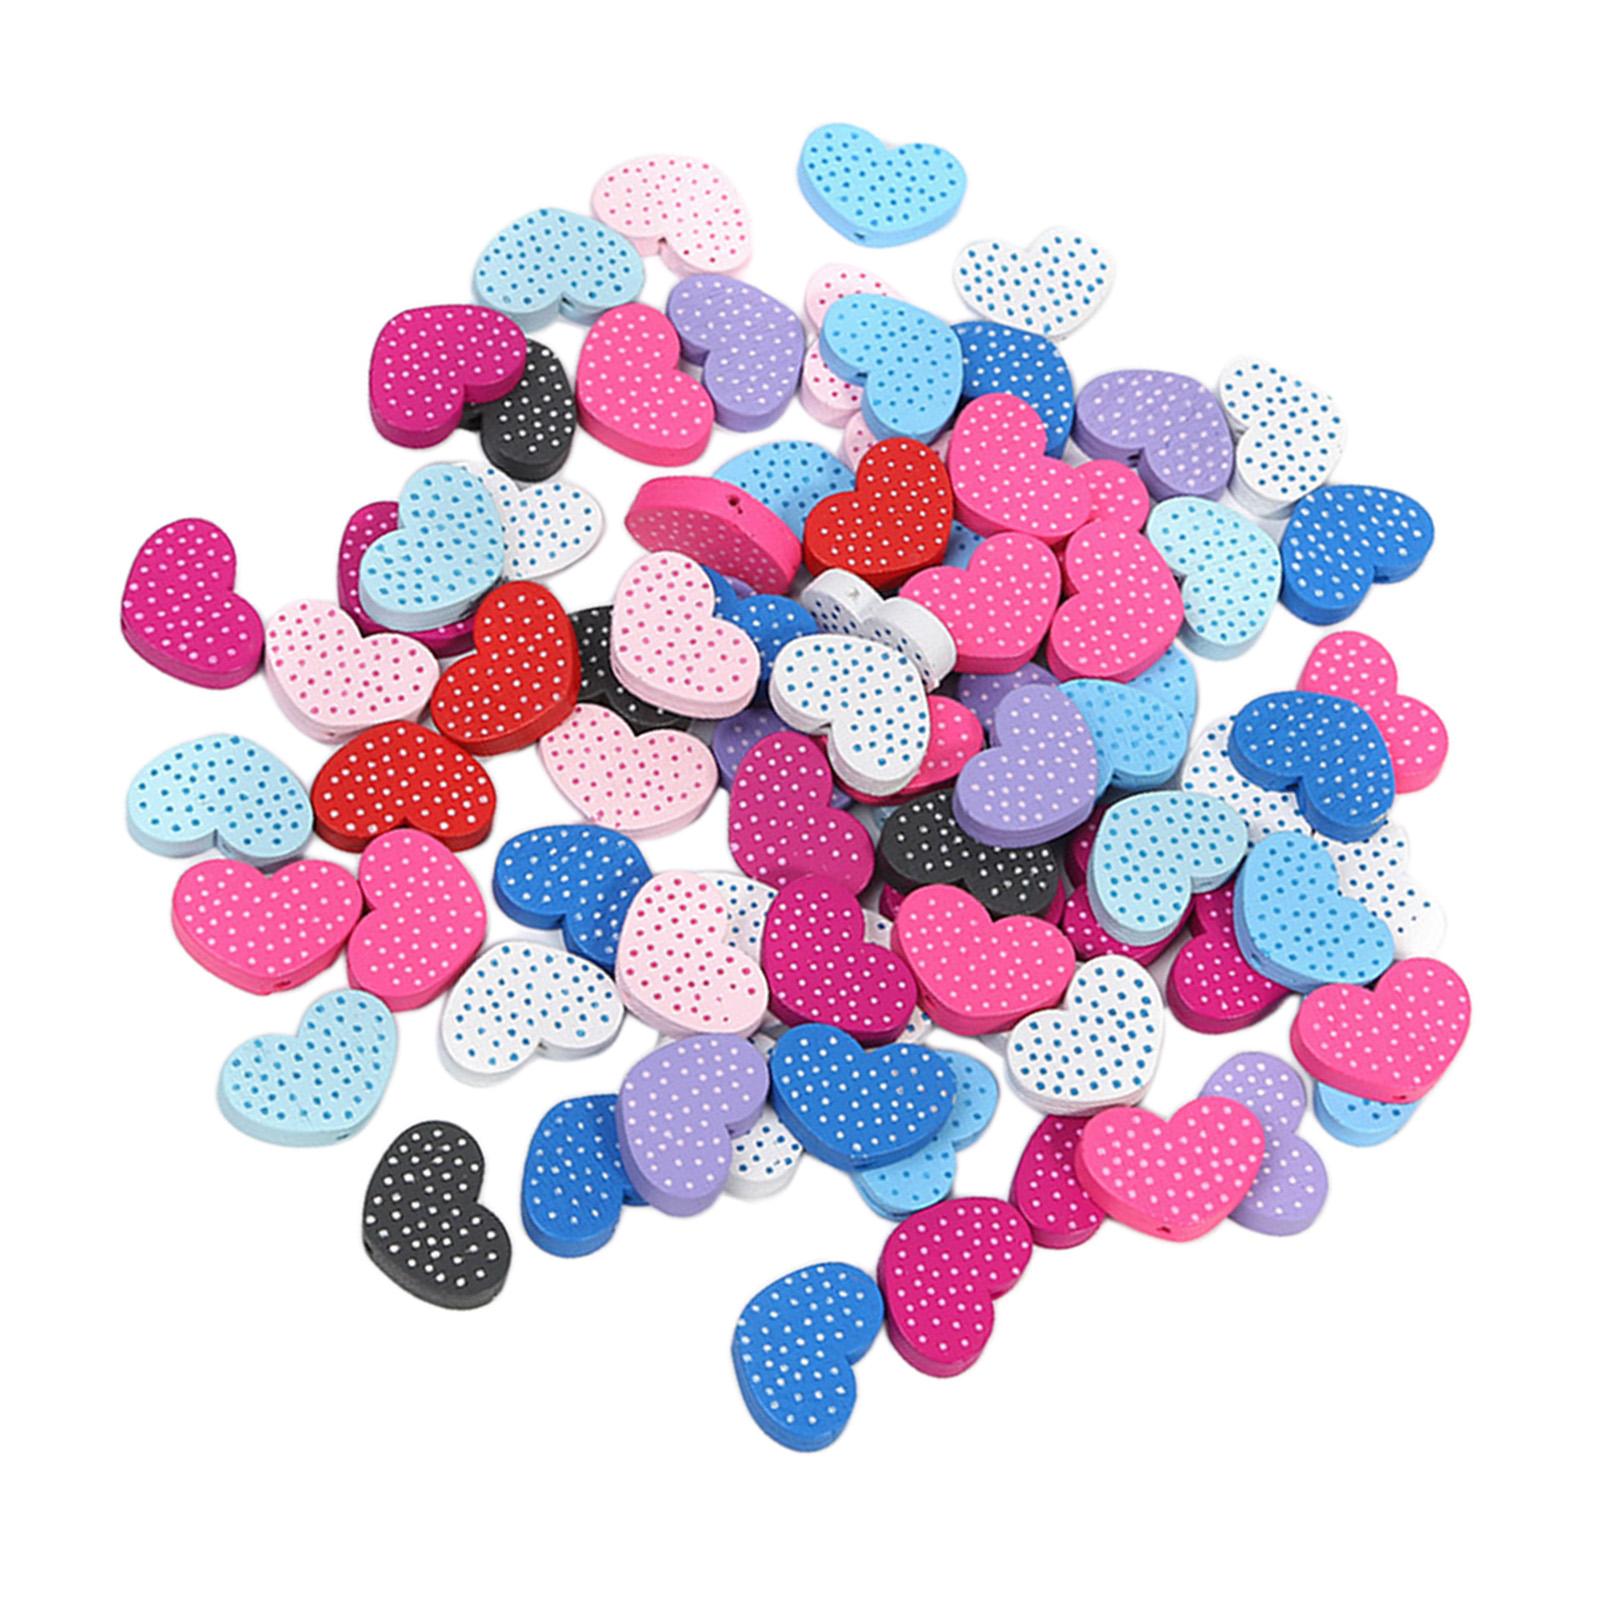 100 Pieces Beads Charms Heart for Jewelry Making Bracelet Choker Earrings